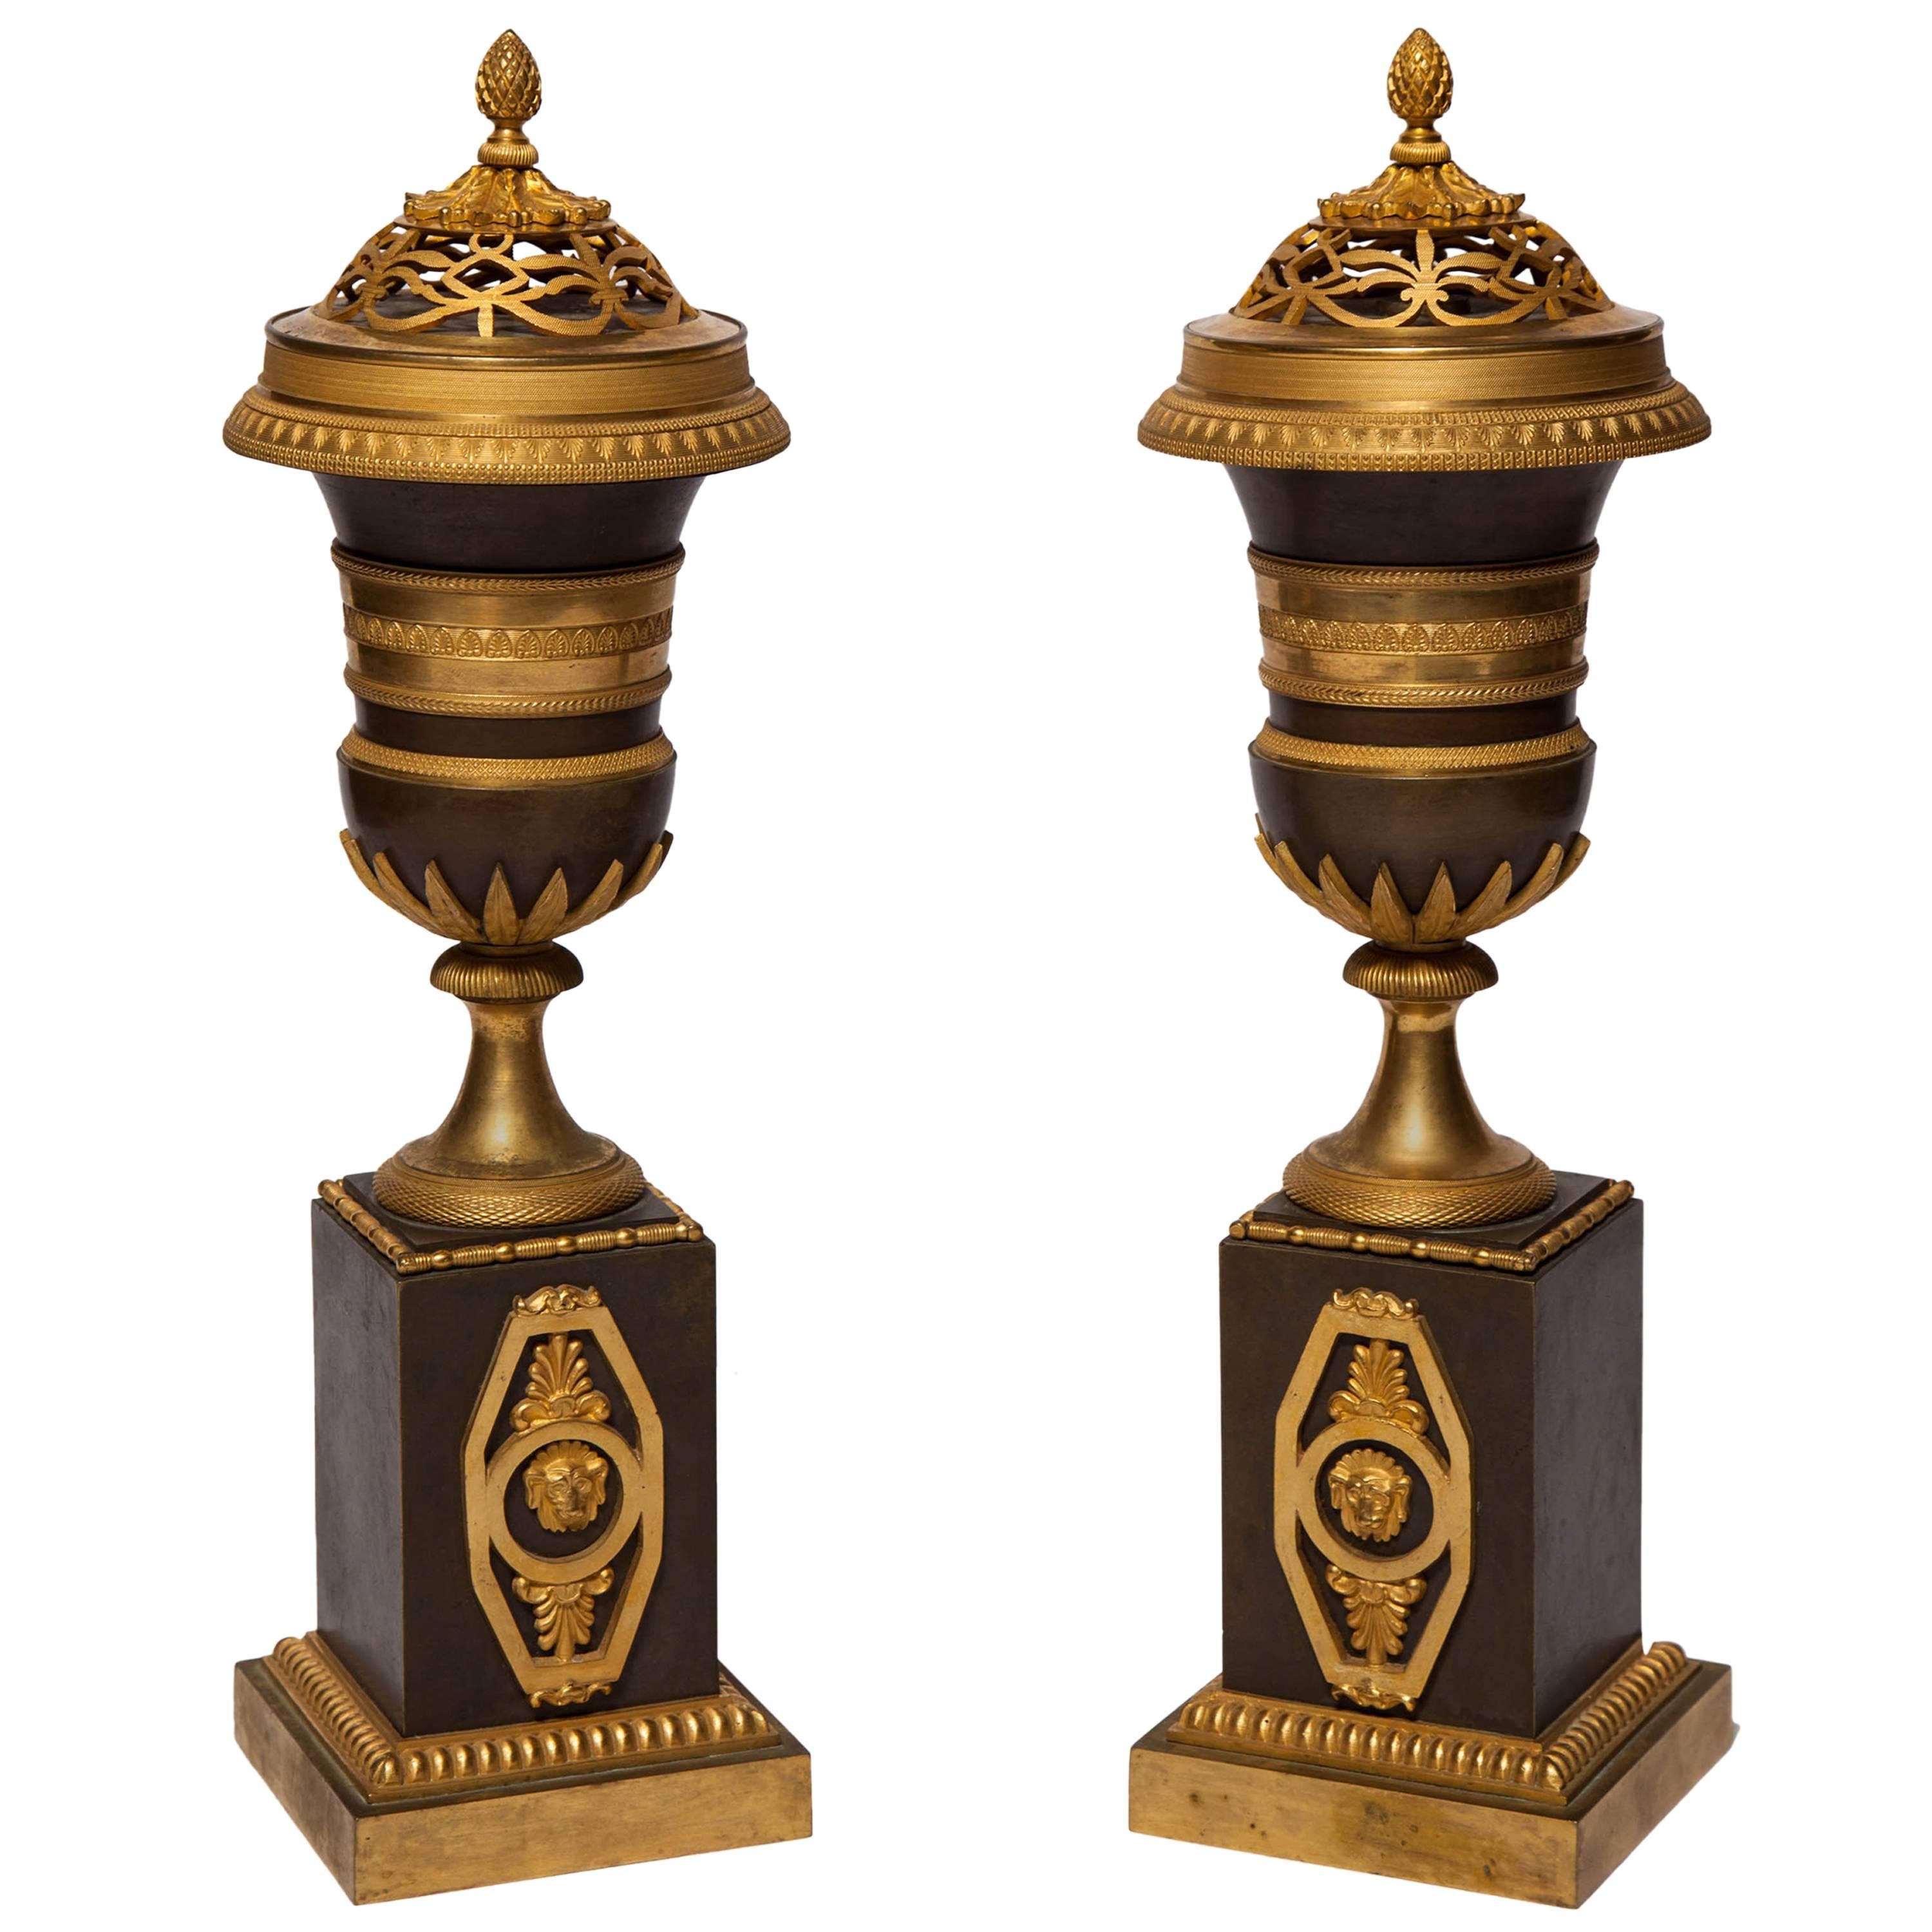 Pair of French/Russian Empire Gilt and Patinated Bronze Cassolettes